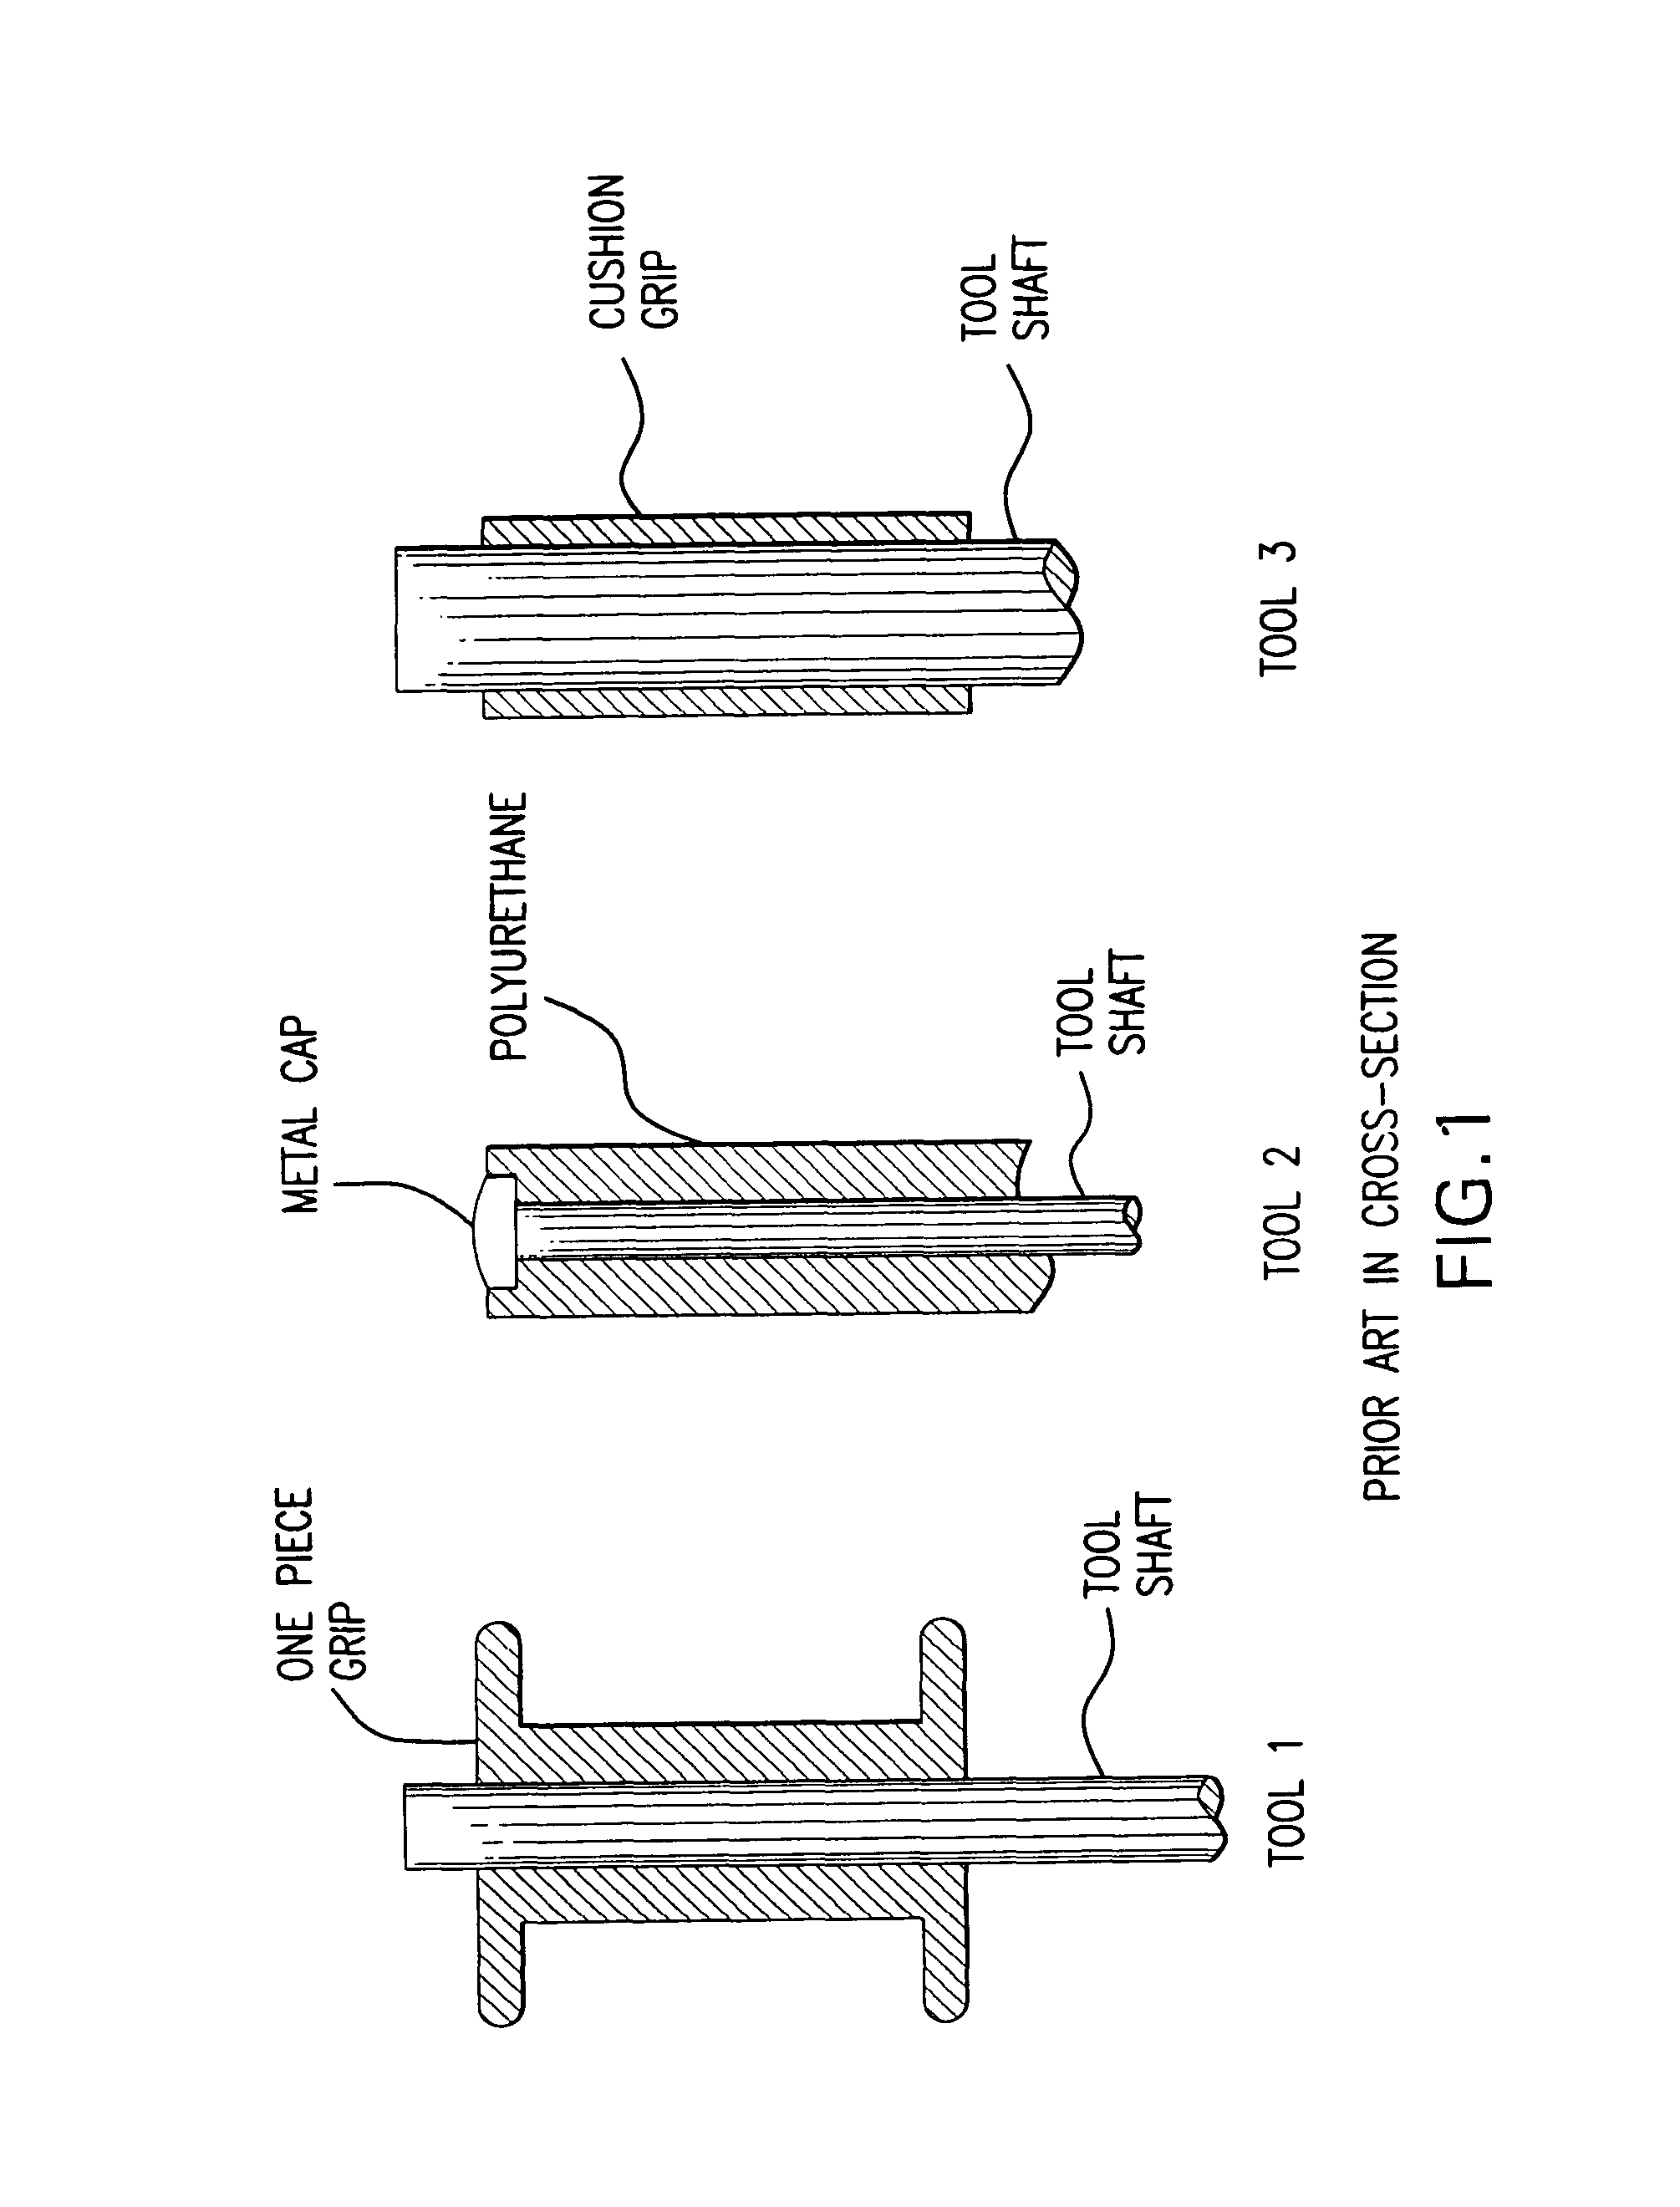 Anti-spalling combination on an impact tool with an improved holding system